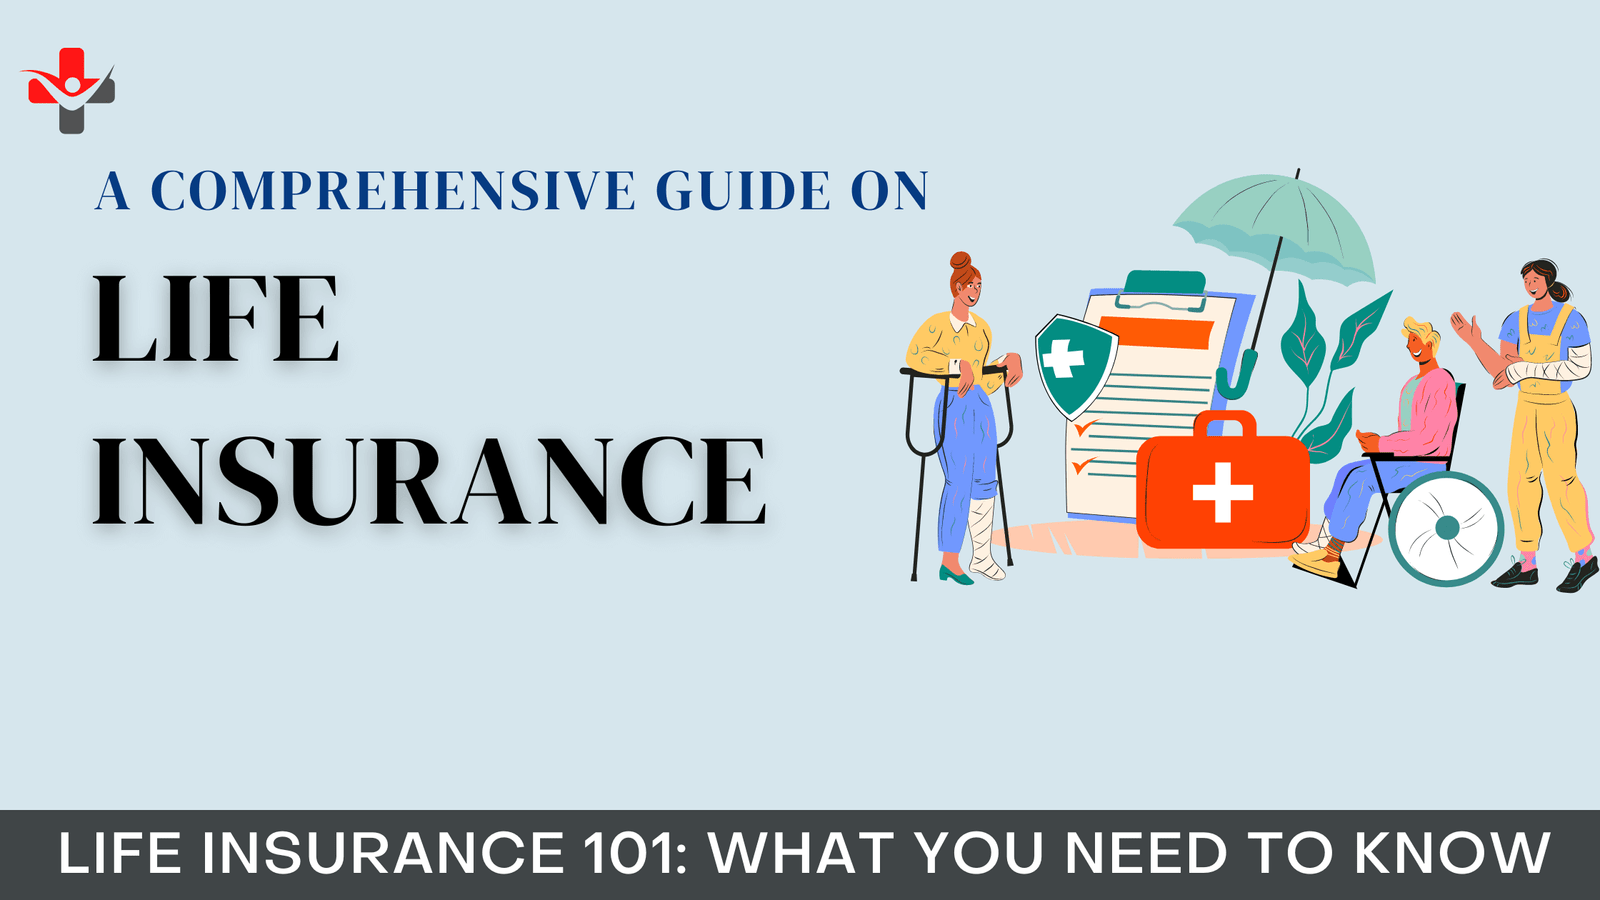 Life Insurance 101: What You Need to Know